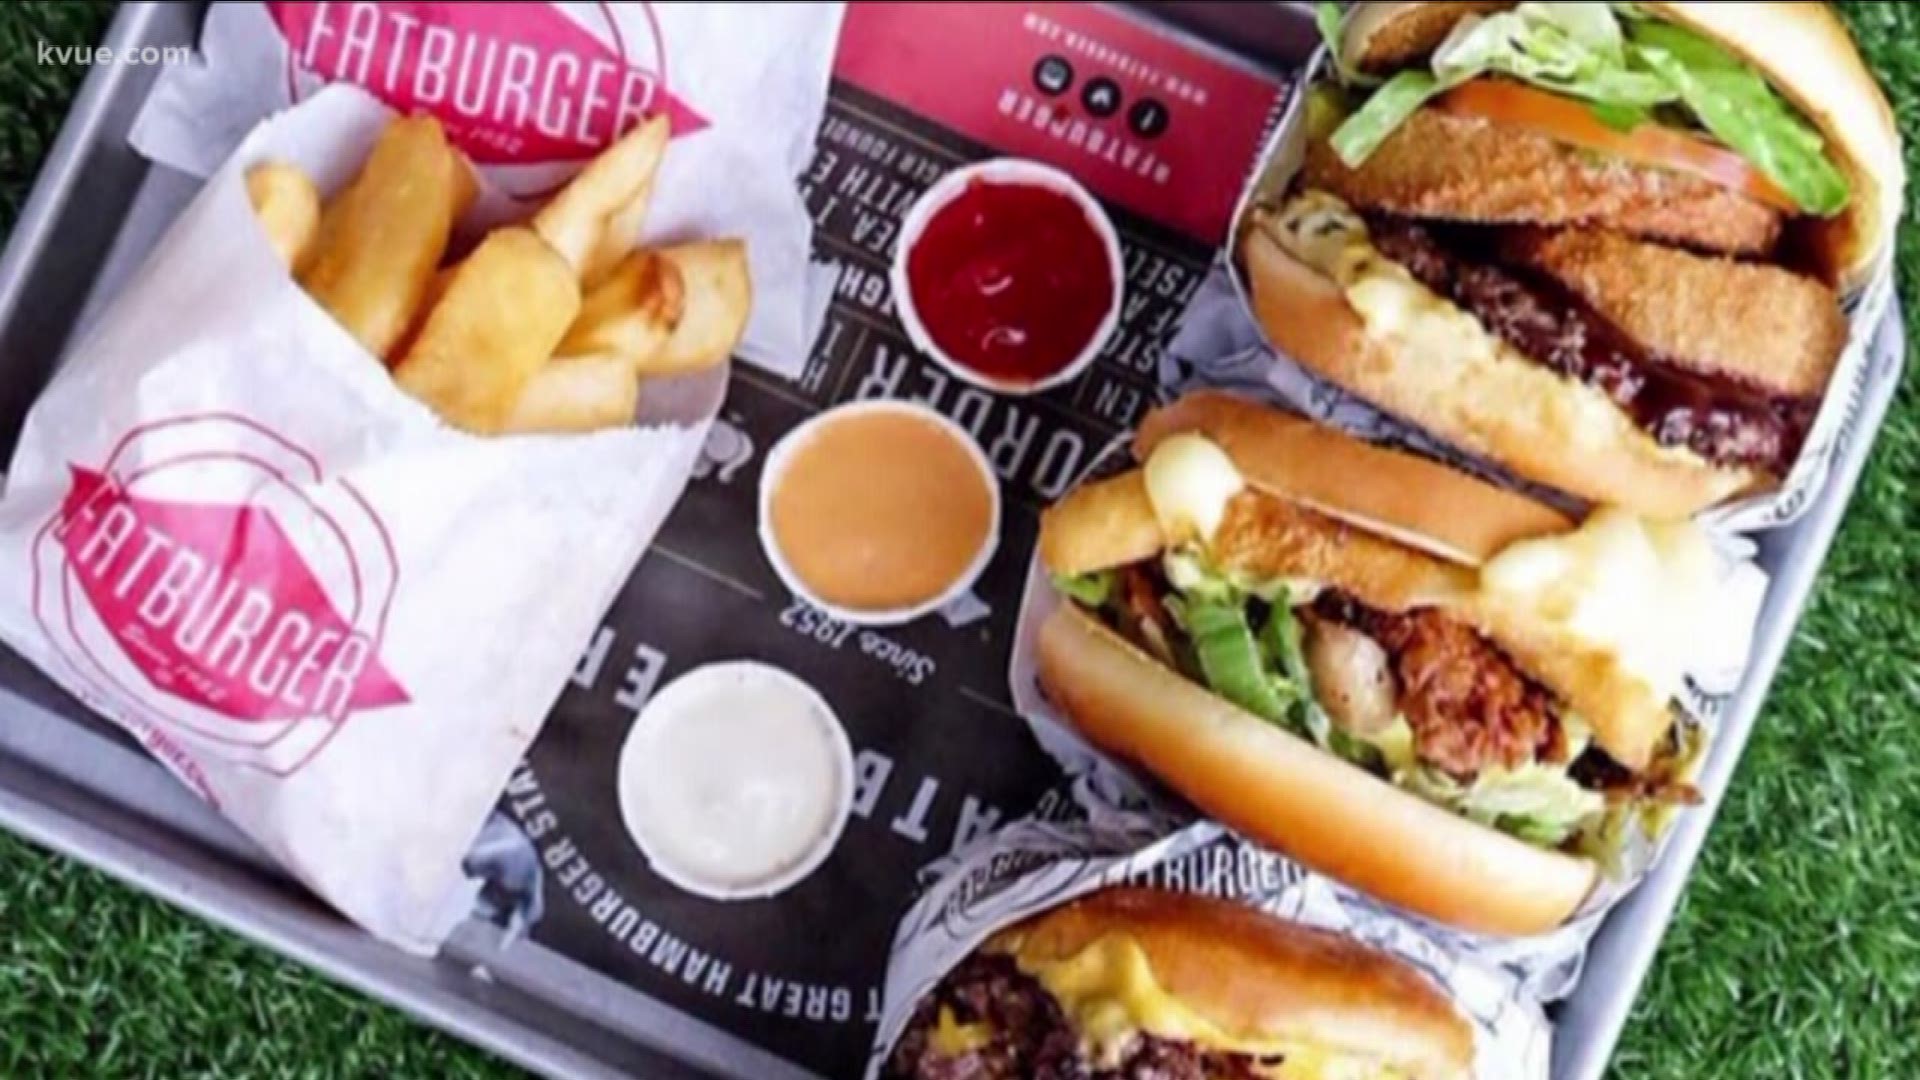 A Beverly Hills-based burger chain is heading to Central Texas.